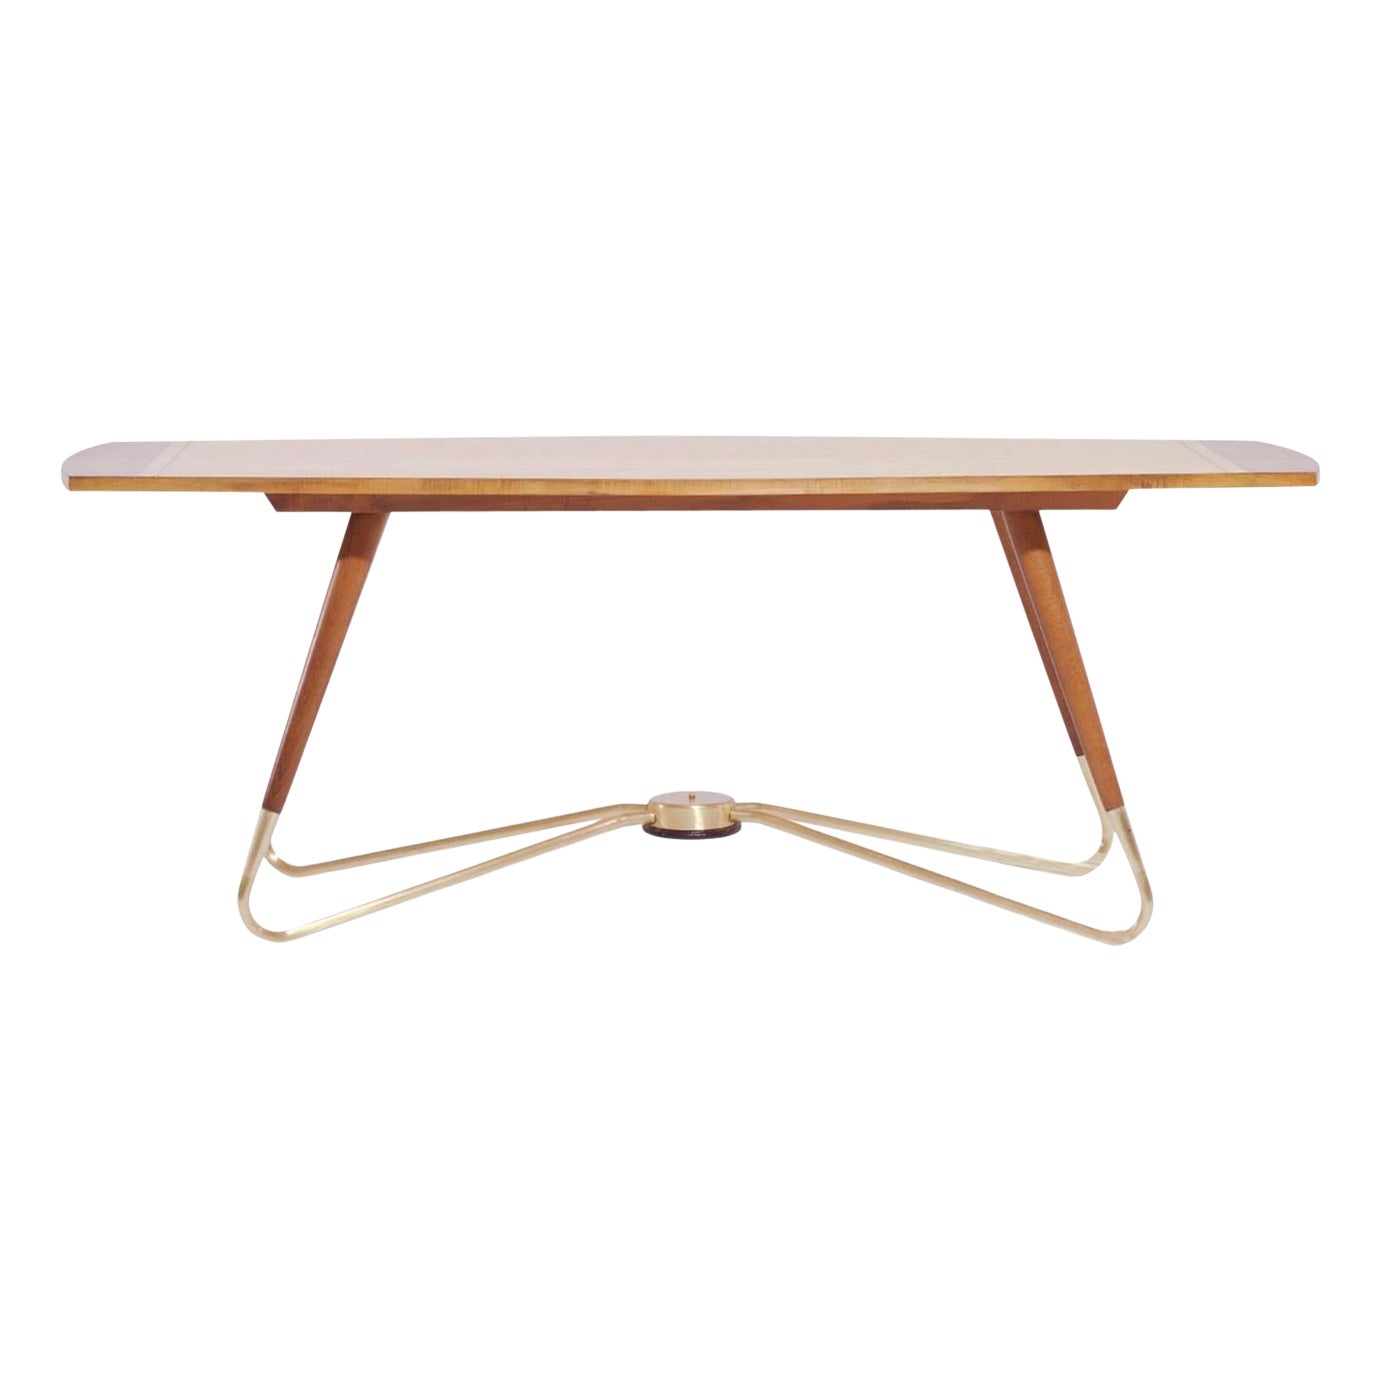 20th Century German Modern Maplewood Coffee Table - Sofa Table by Ilse Möbel For Sale